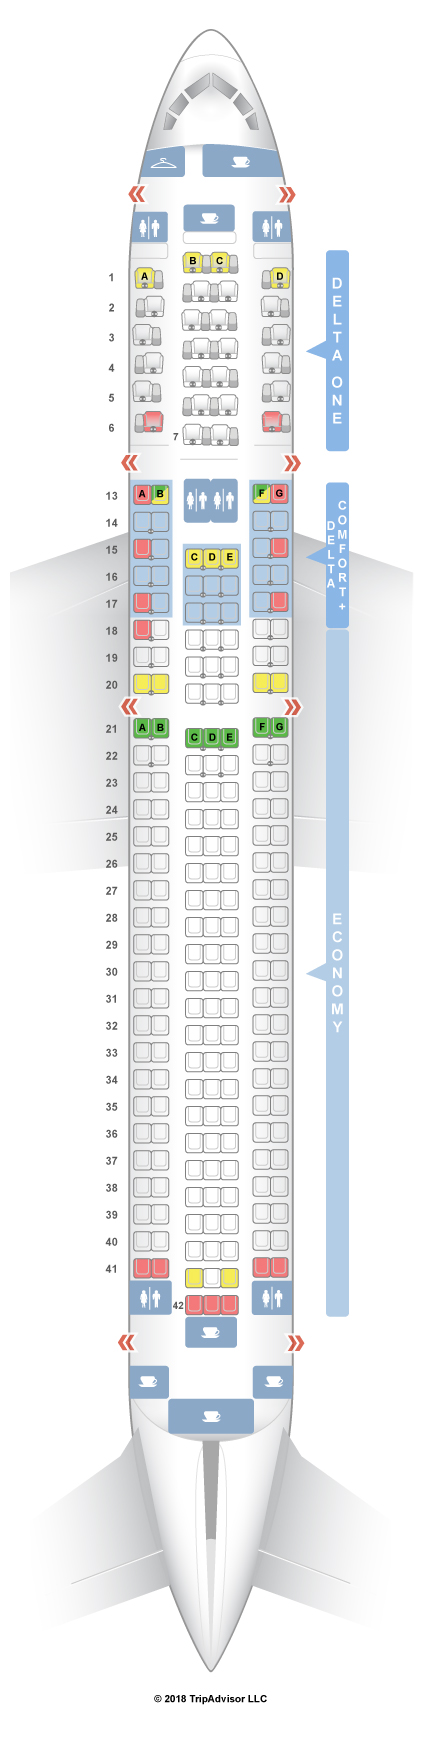 What are the different types of seats available on a Delta plane?